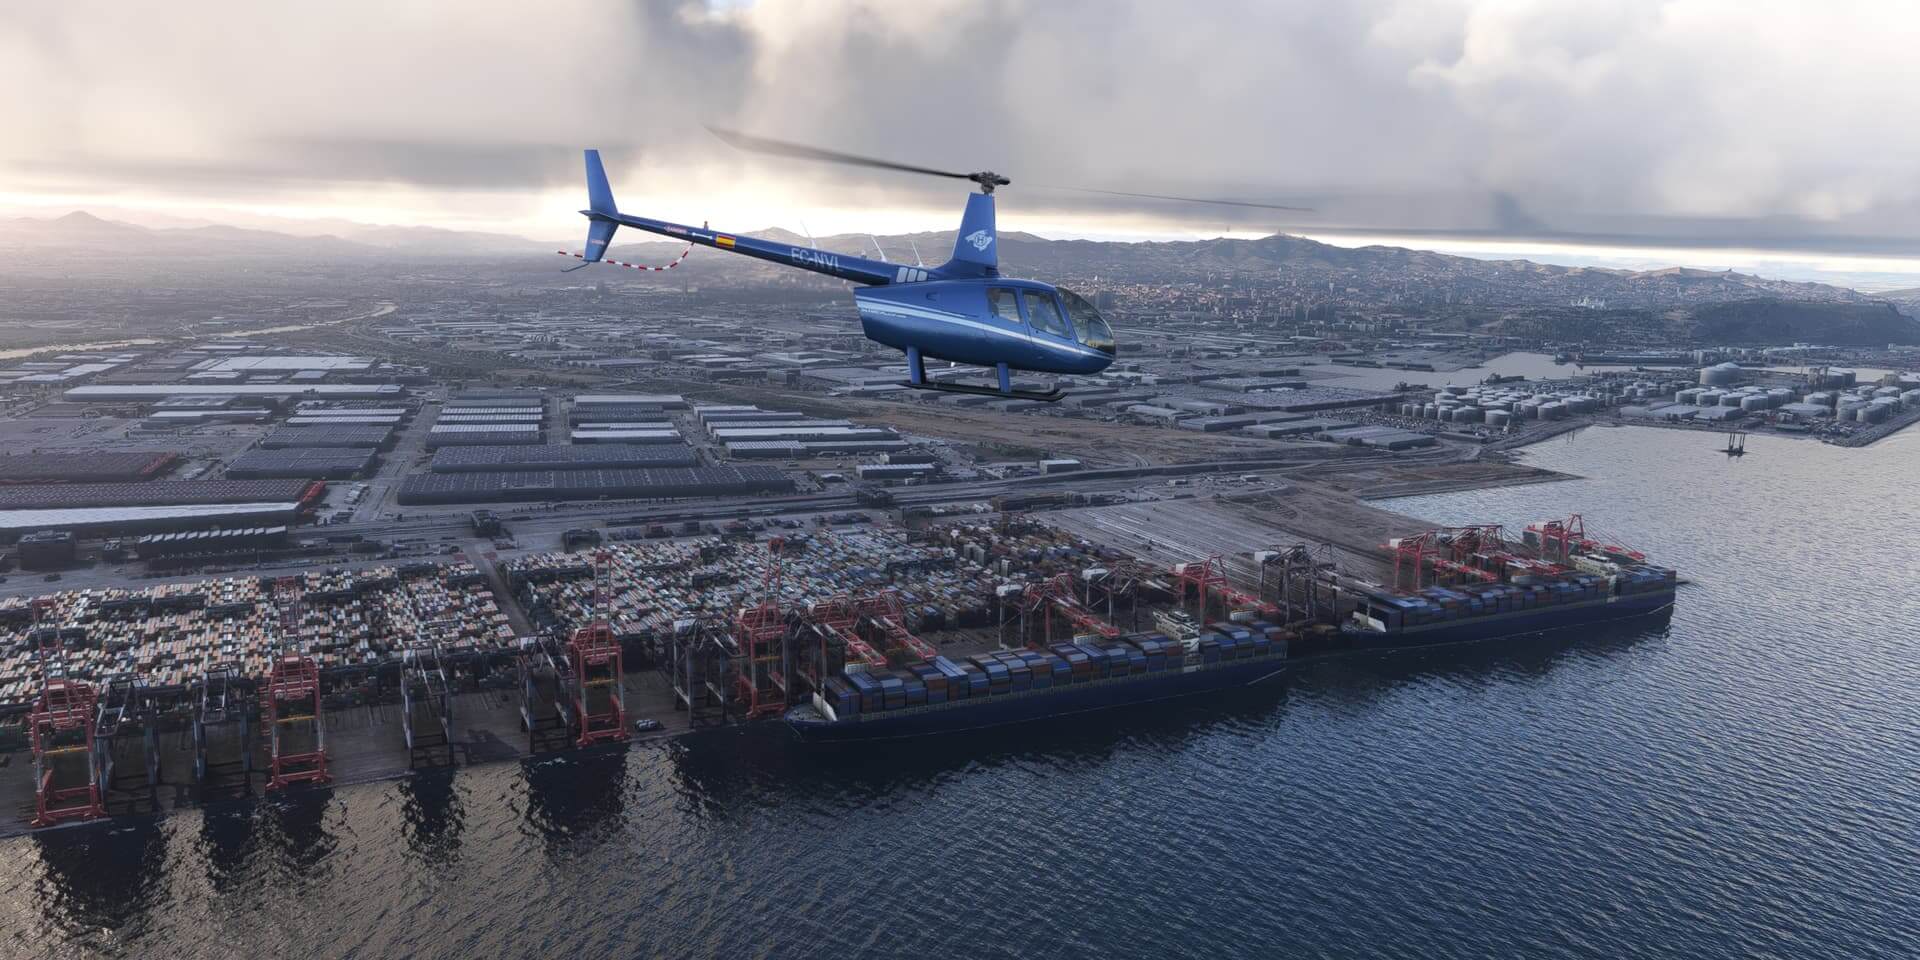 A Robinson R66 Helicopter cruises low by the port of Barcelona, Spain